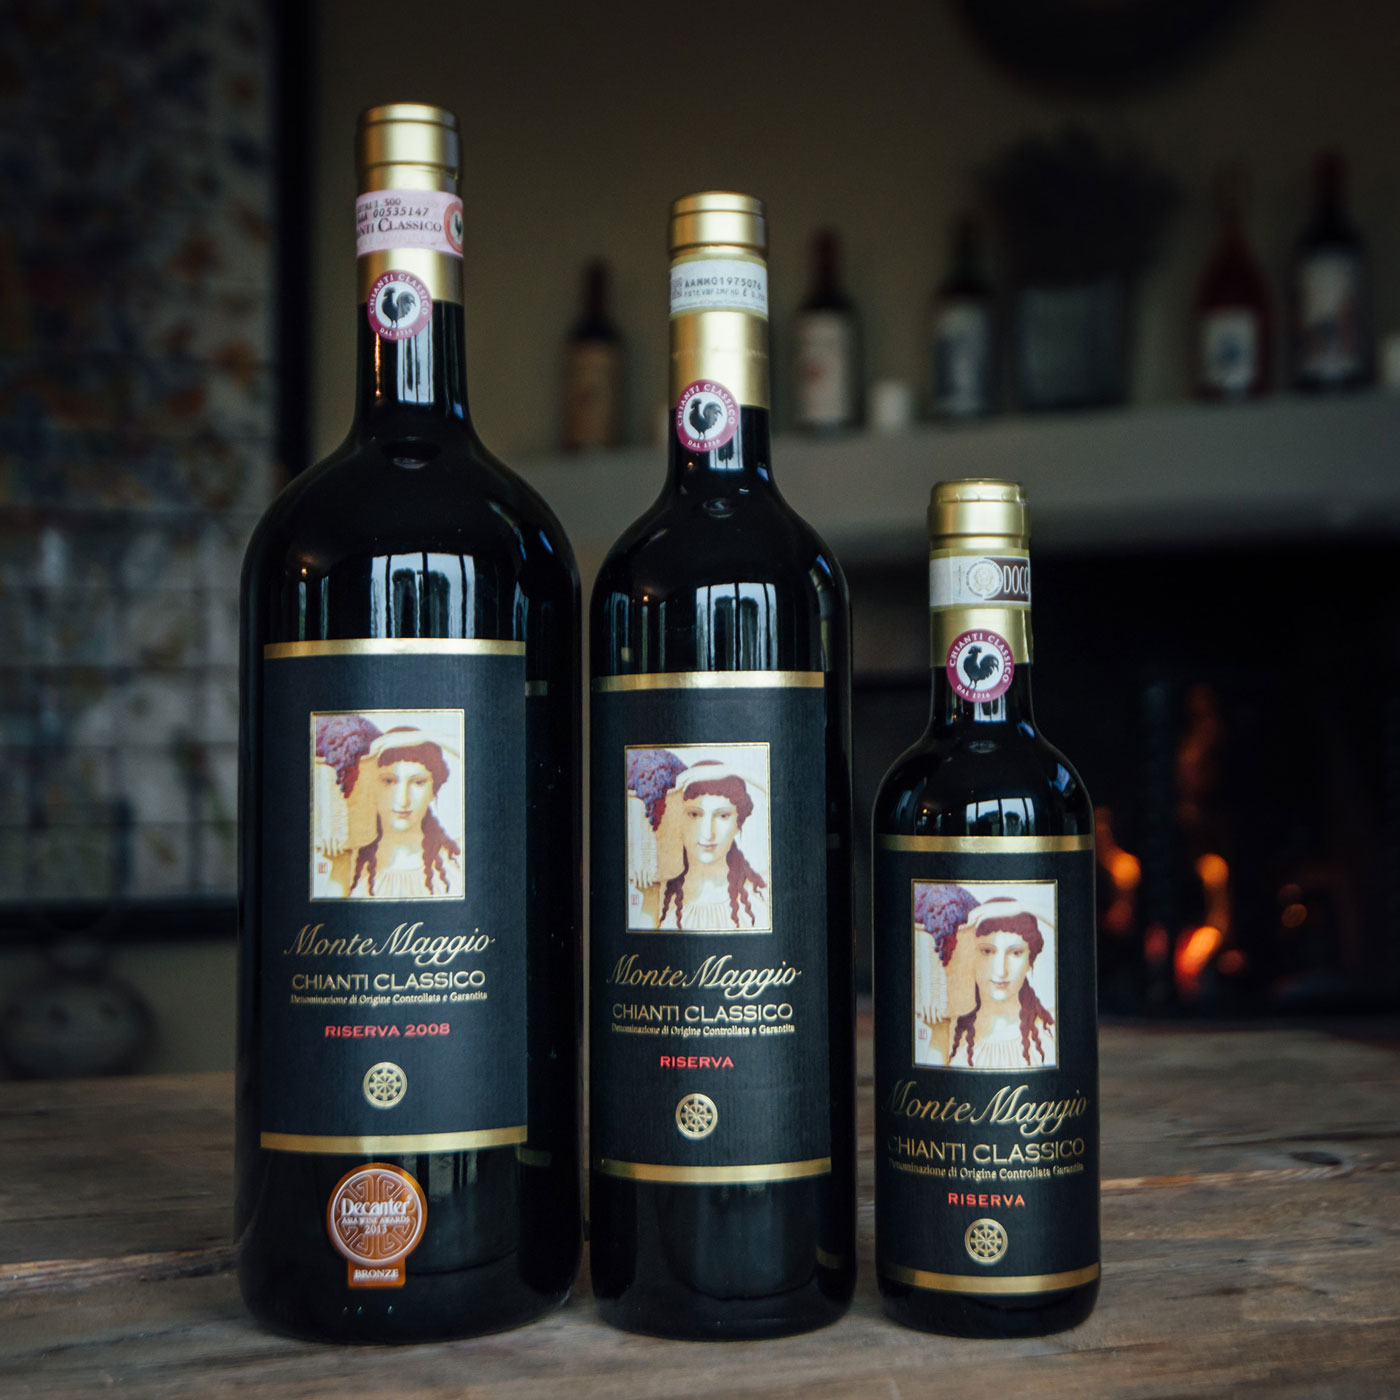 Experience Italy with this authentic Tuscan wine, Chianti Classico Riserva